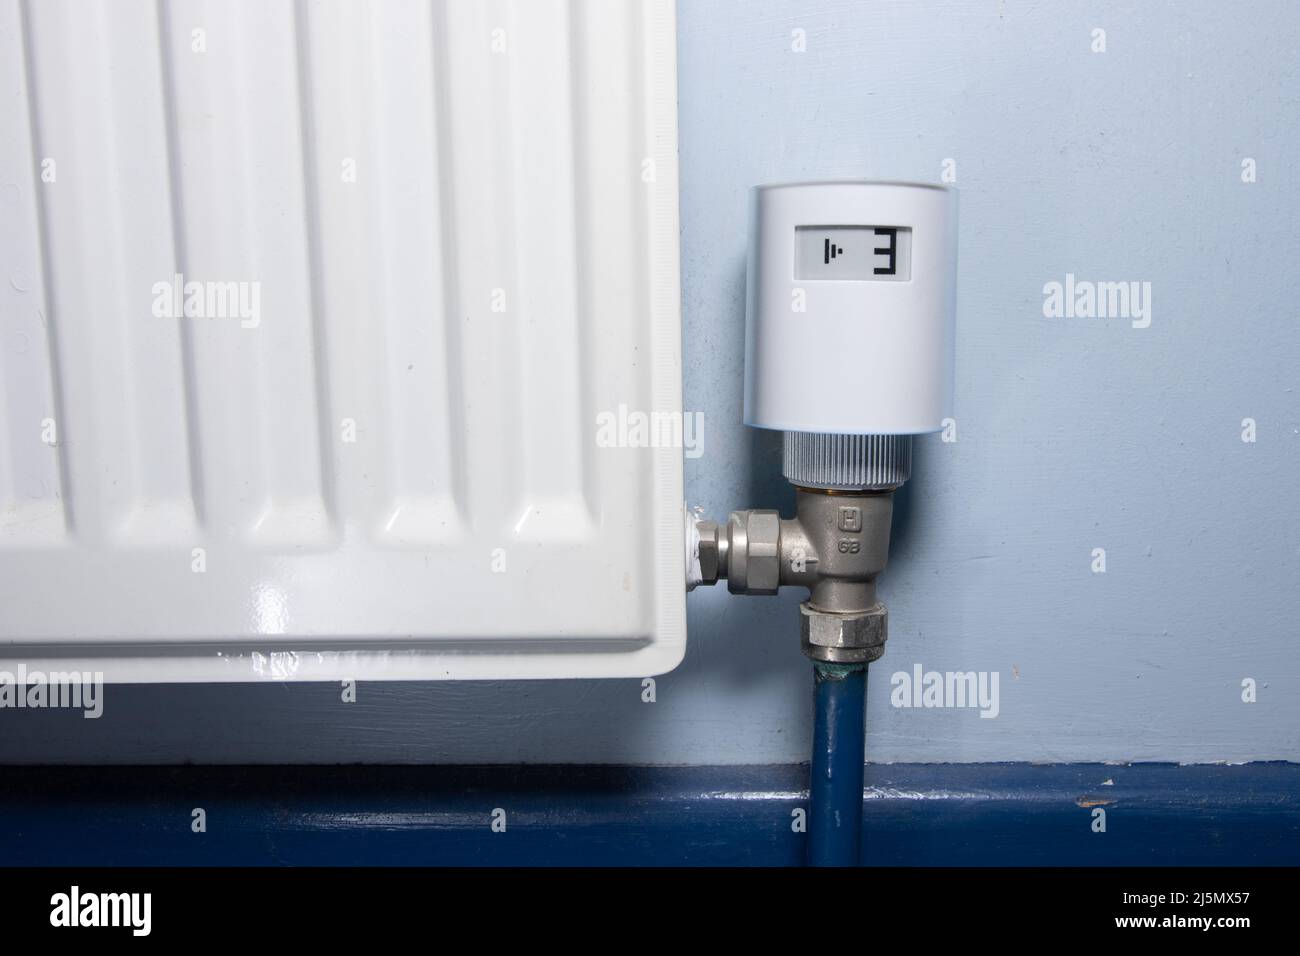 A smart radiator valve connecting to wifi Stock Photo